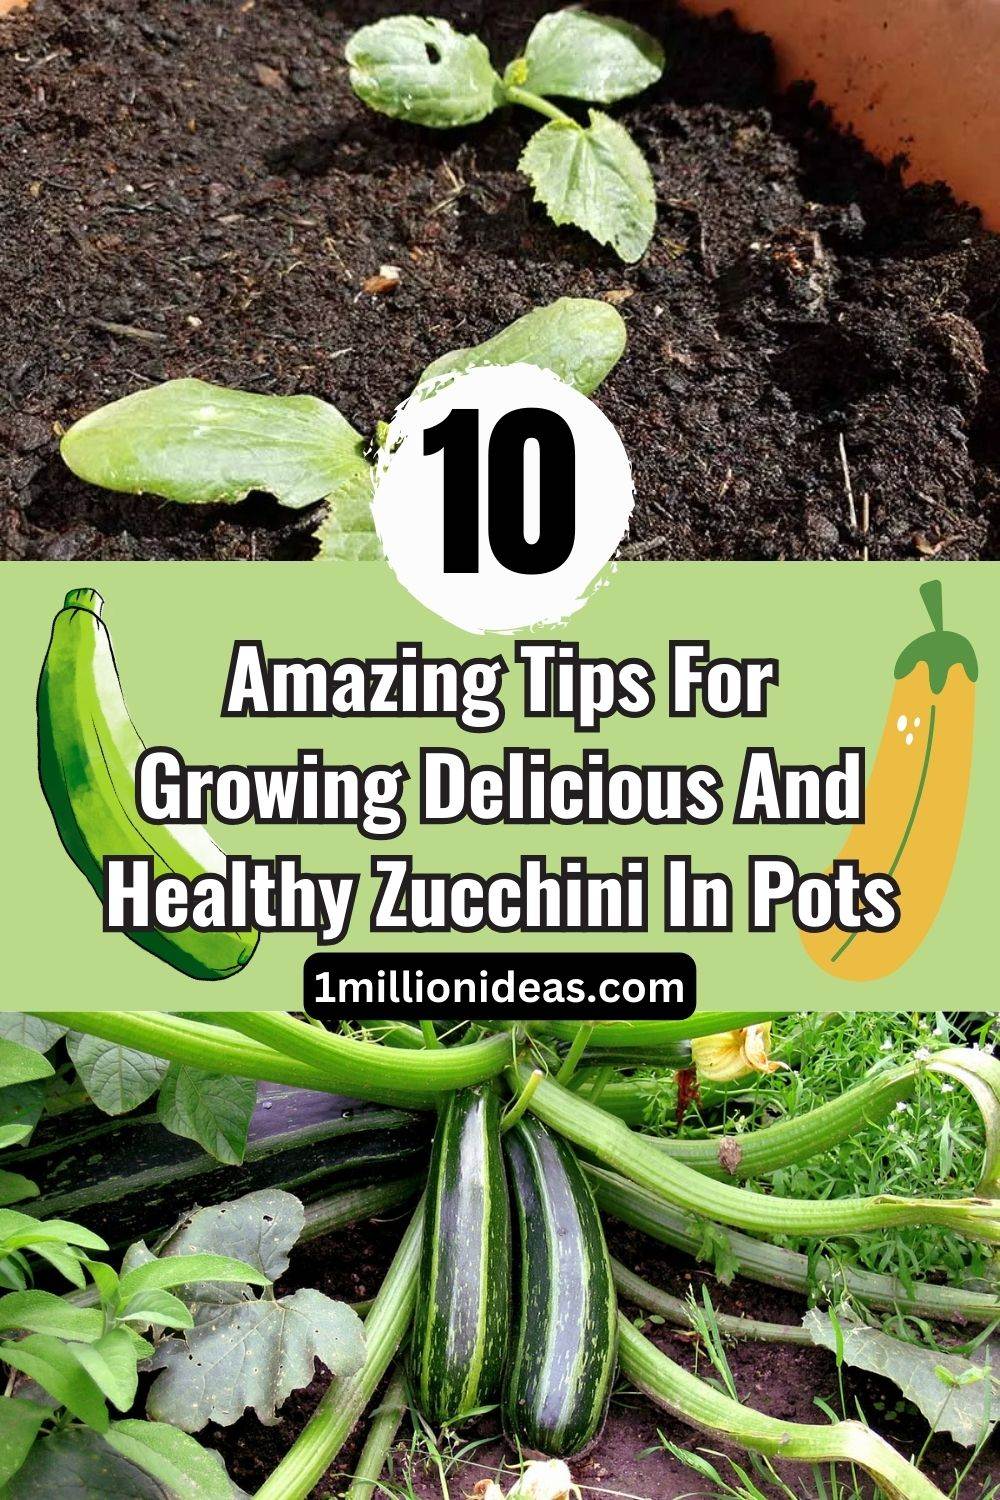 10 Amazing Tips For Growing Delicious And Healthy Zucchini In Pots - 71